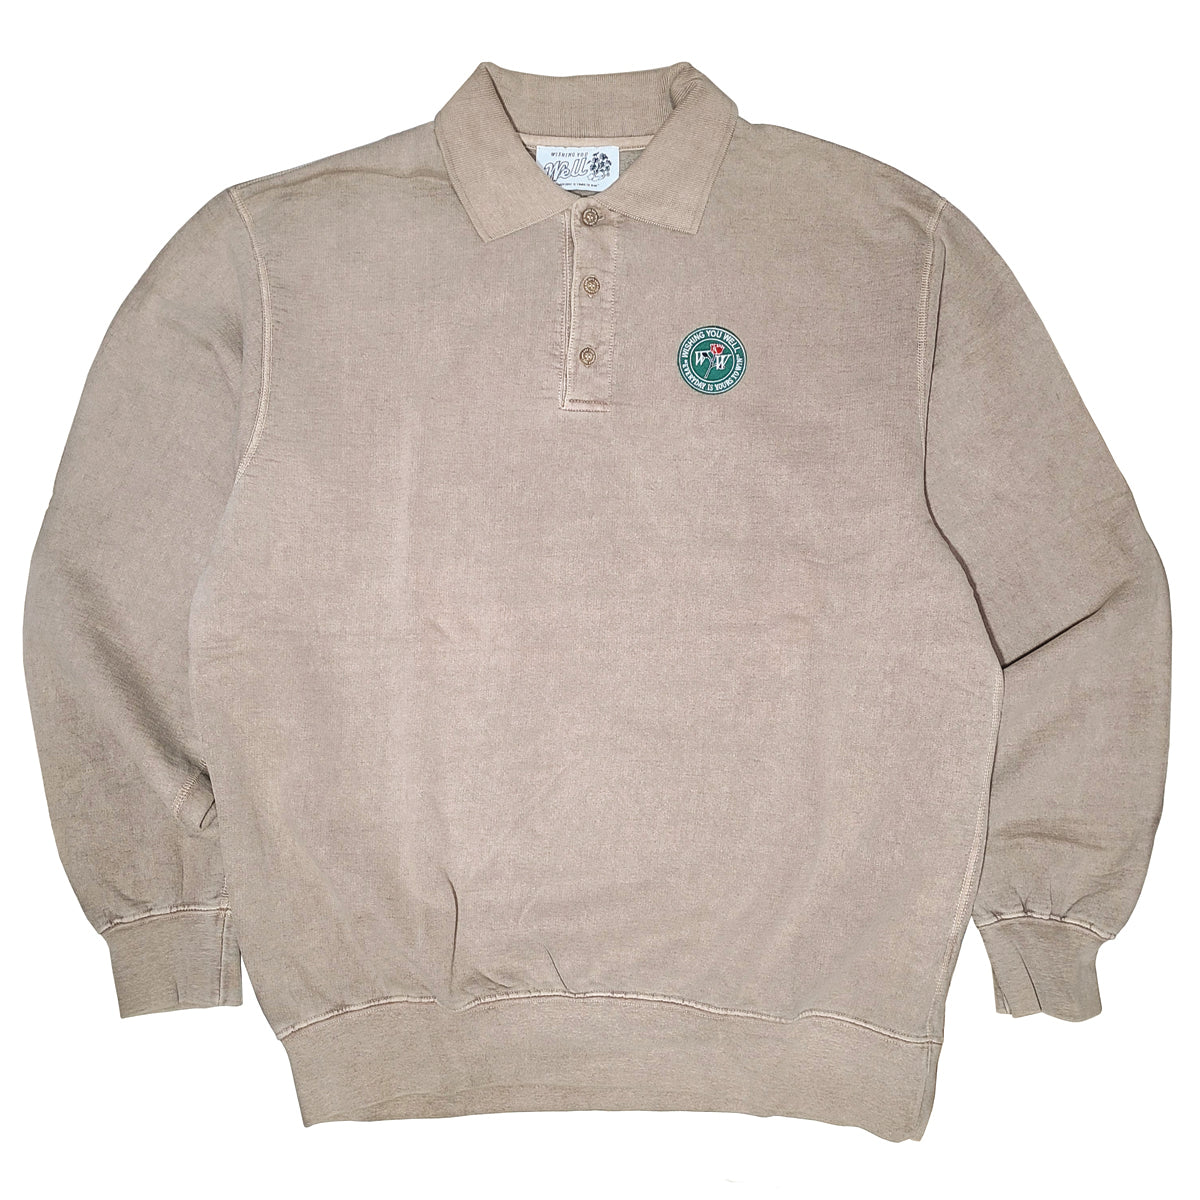 IVY ROSE RUGBY CREWNECK SWEATER (SANDSTONE/GARMENT DYED)